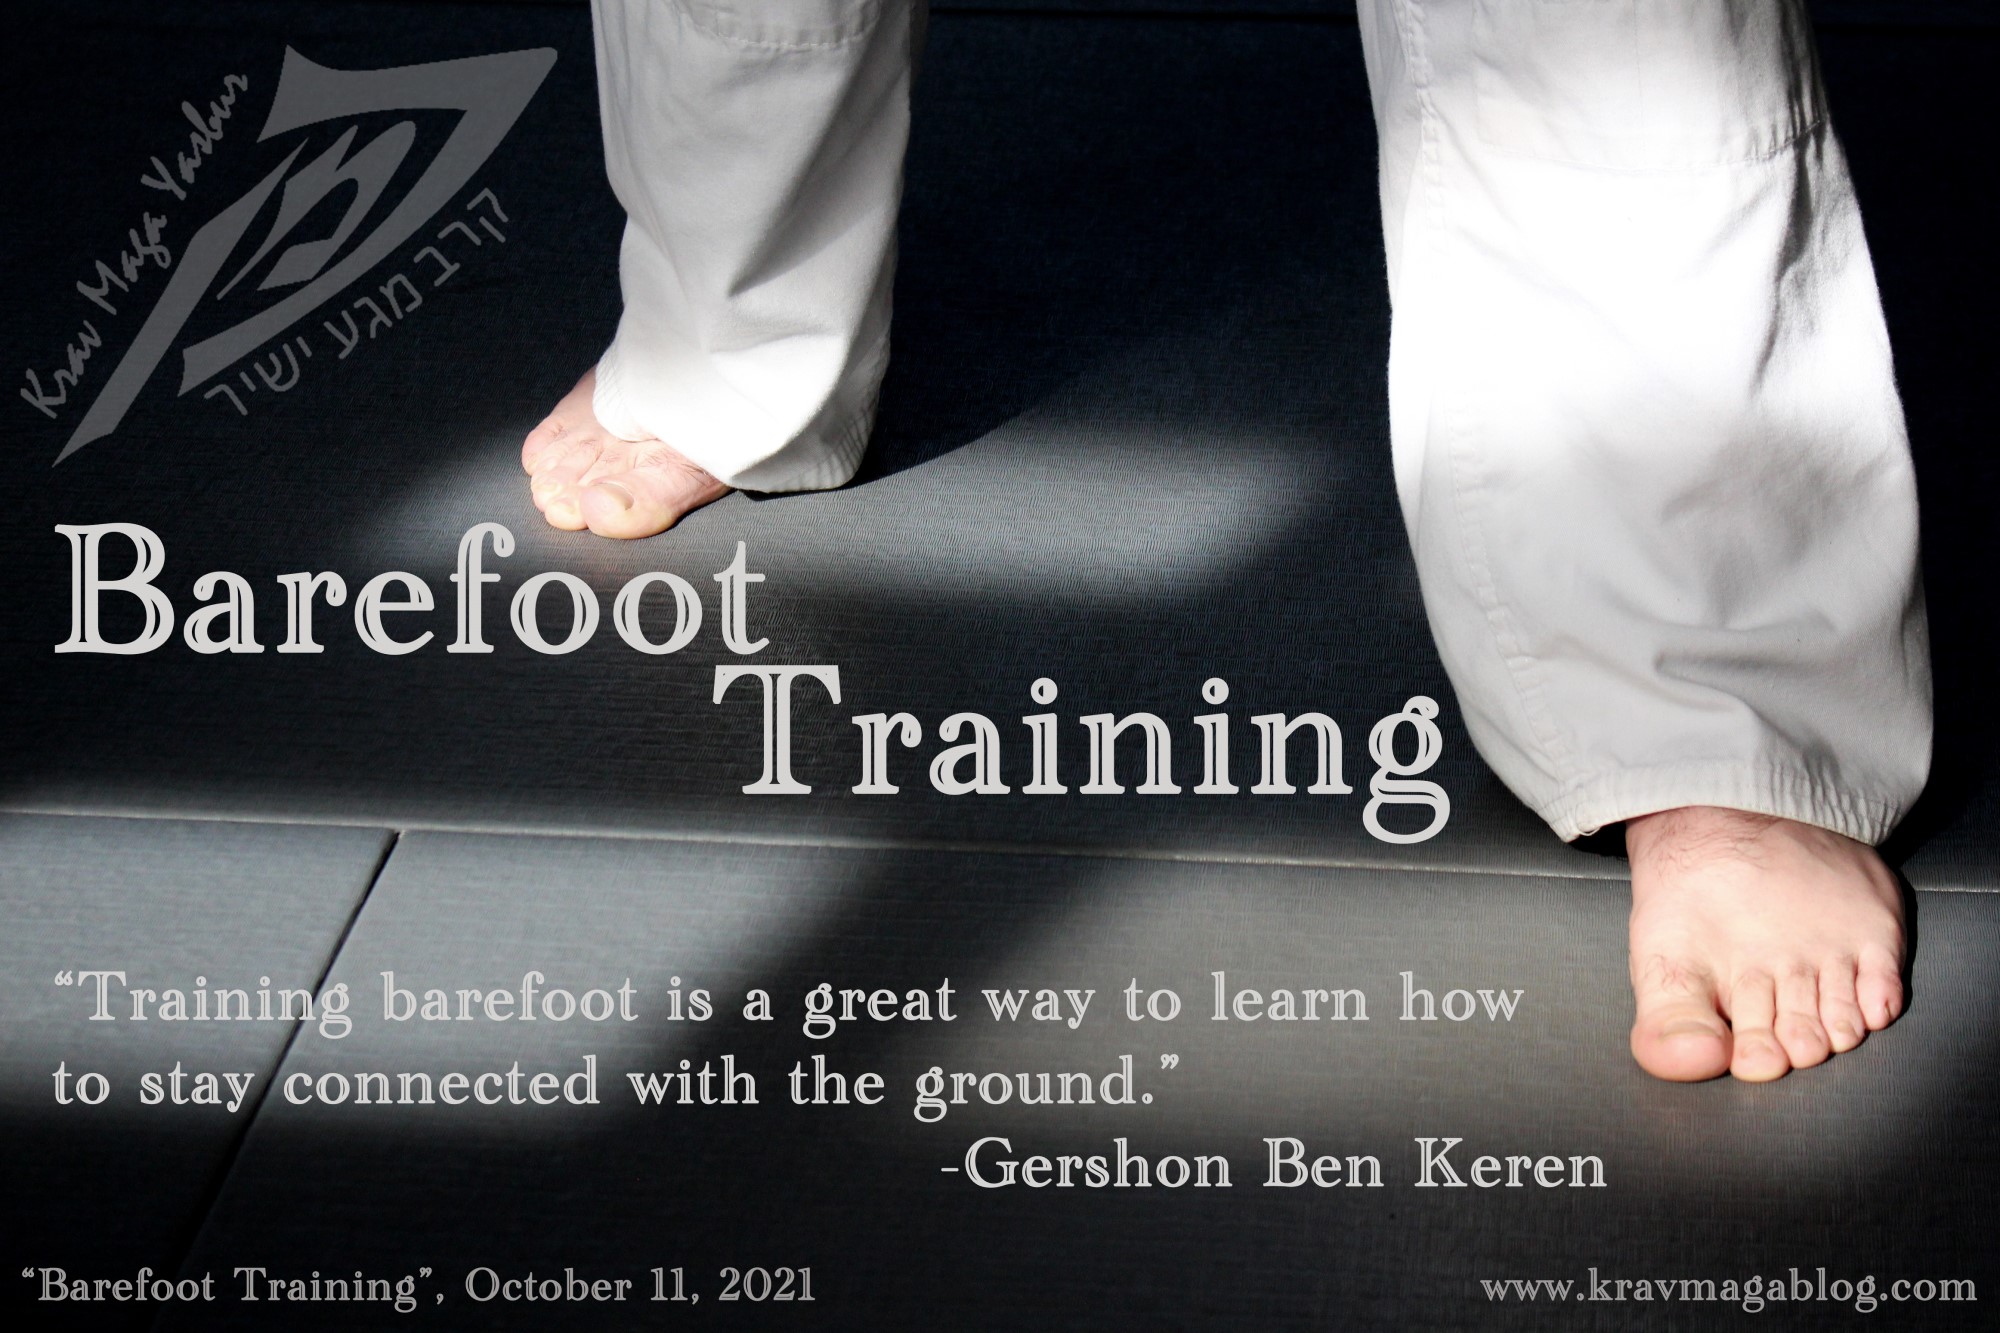 Blog About Barefoot Training